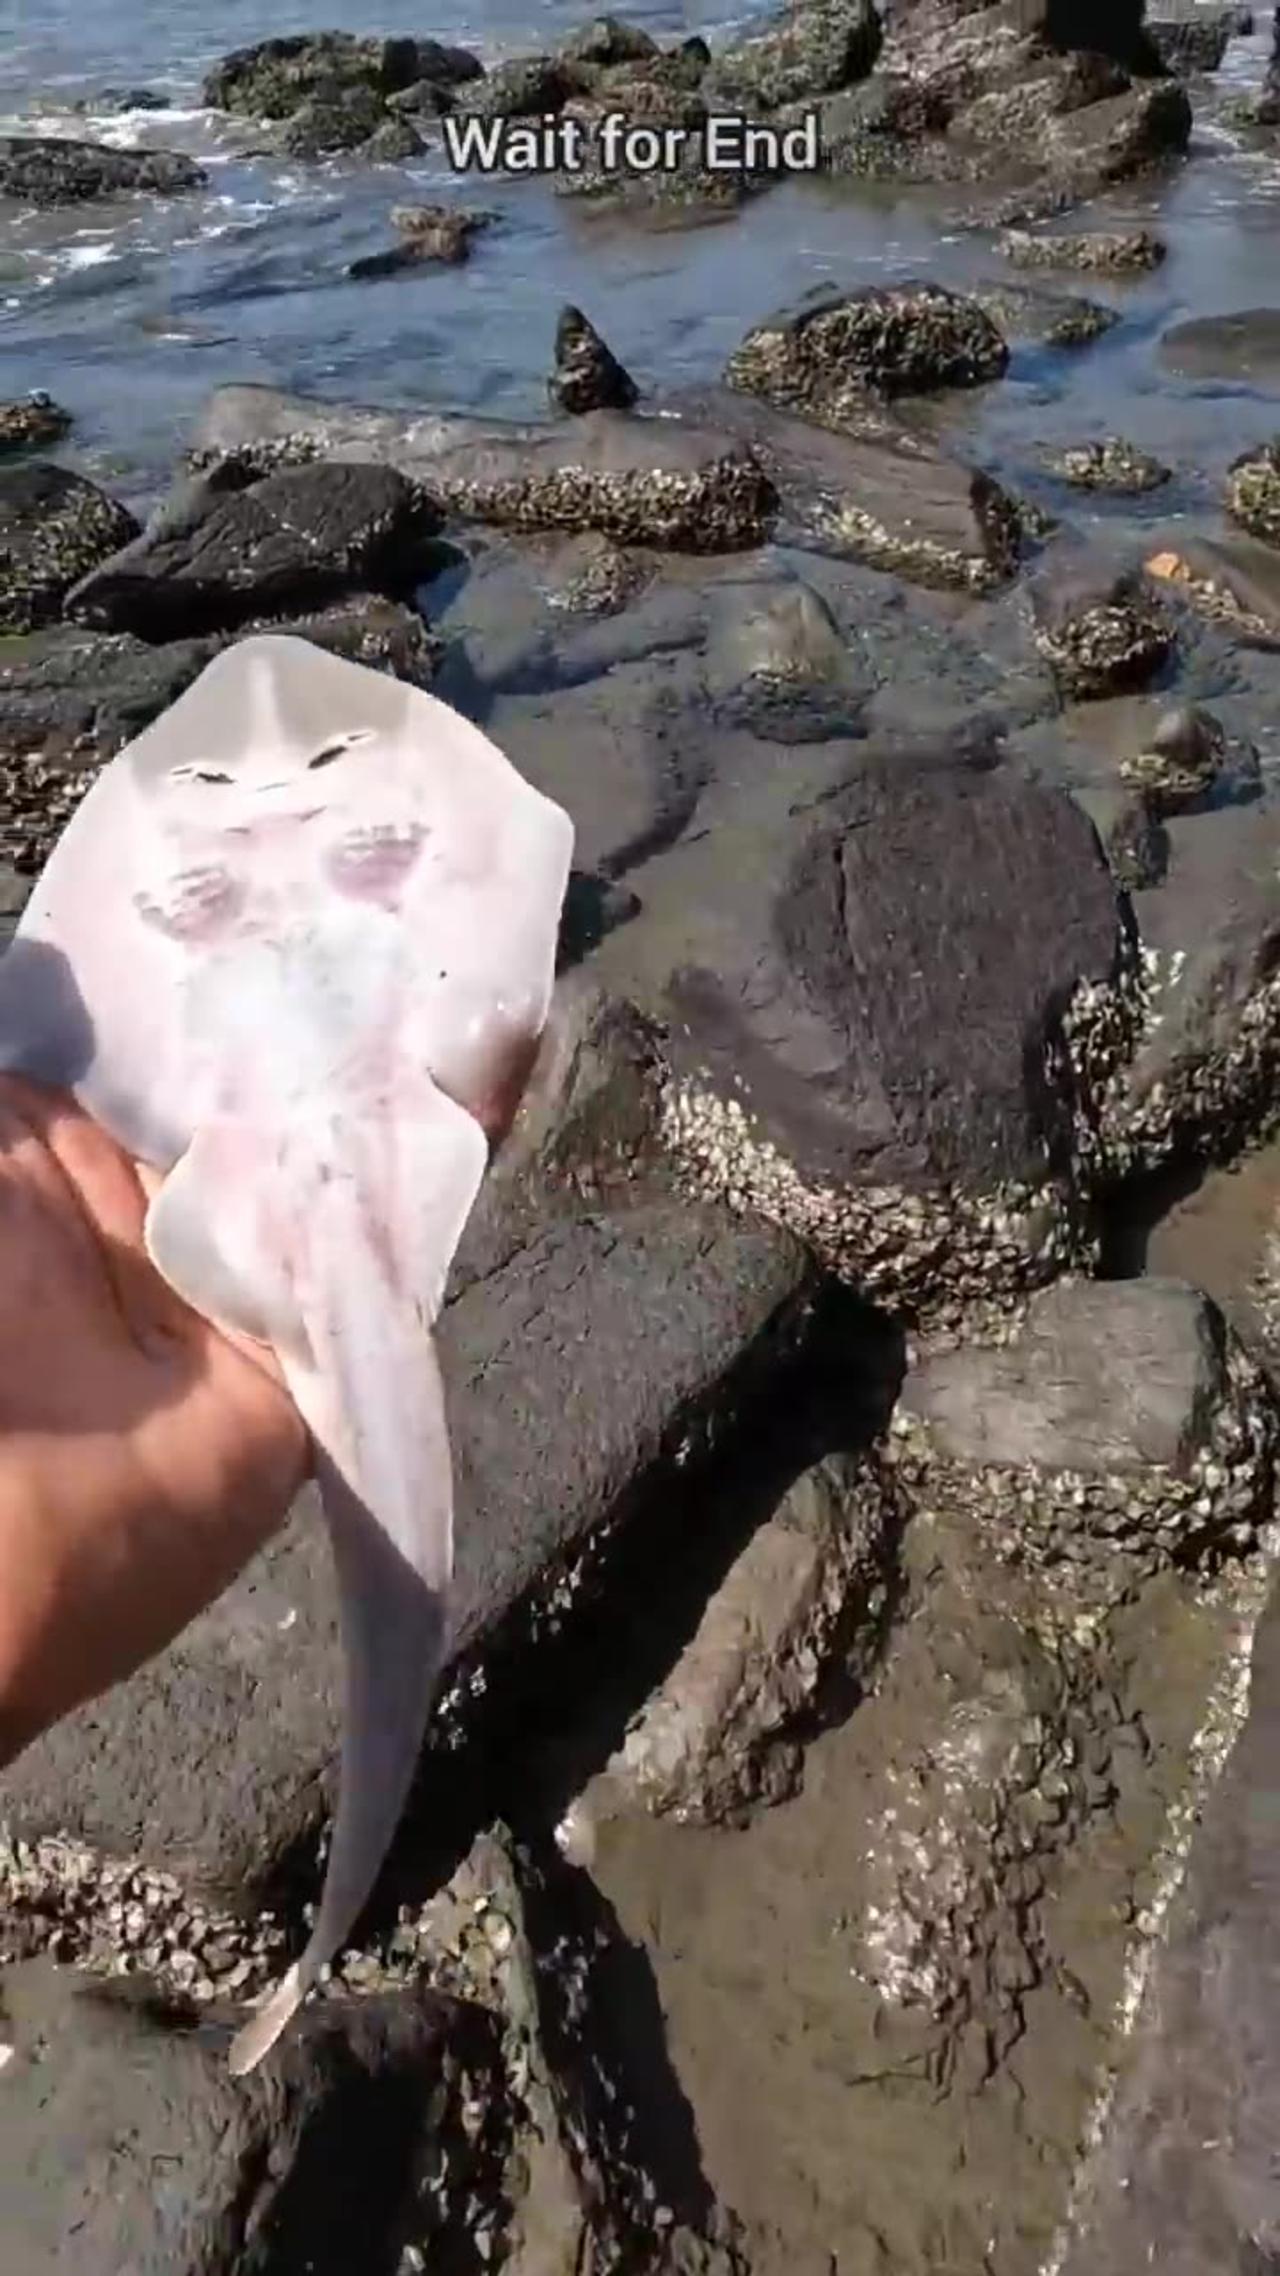 A happy ending - Watch the inspiring rescue of these stingray fish 🥺 #shorts